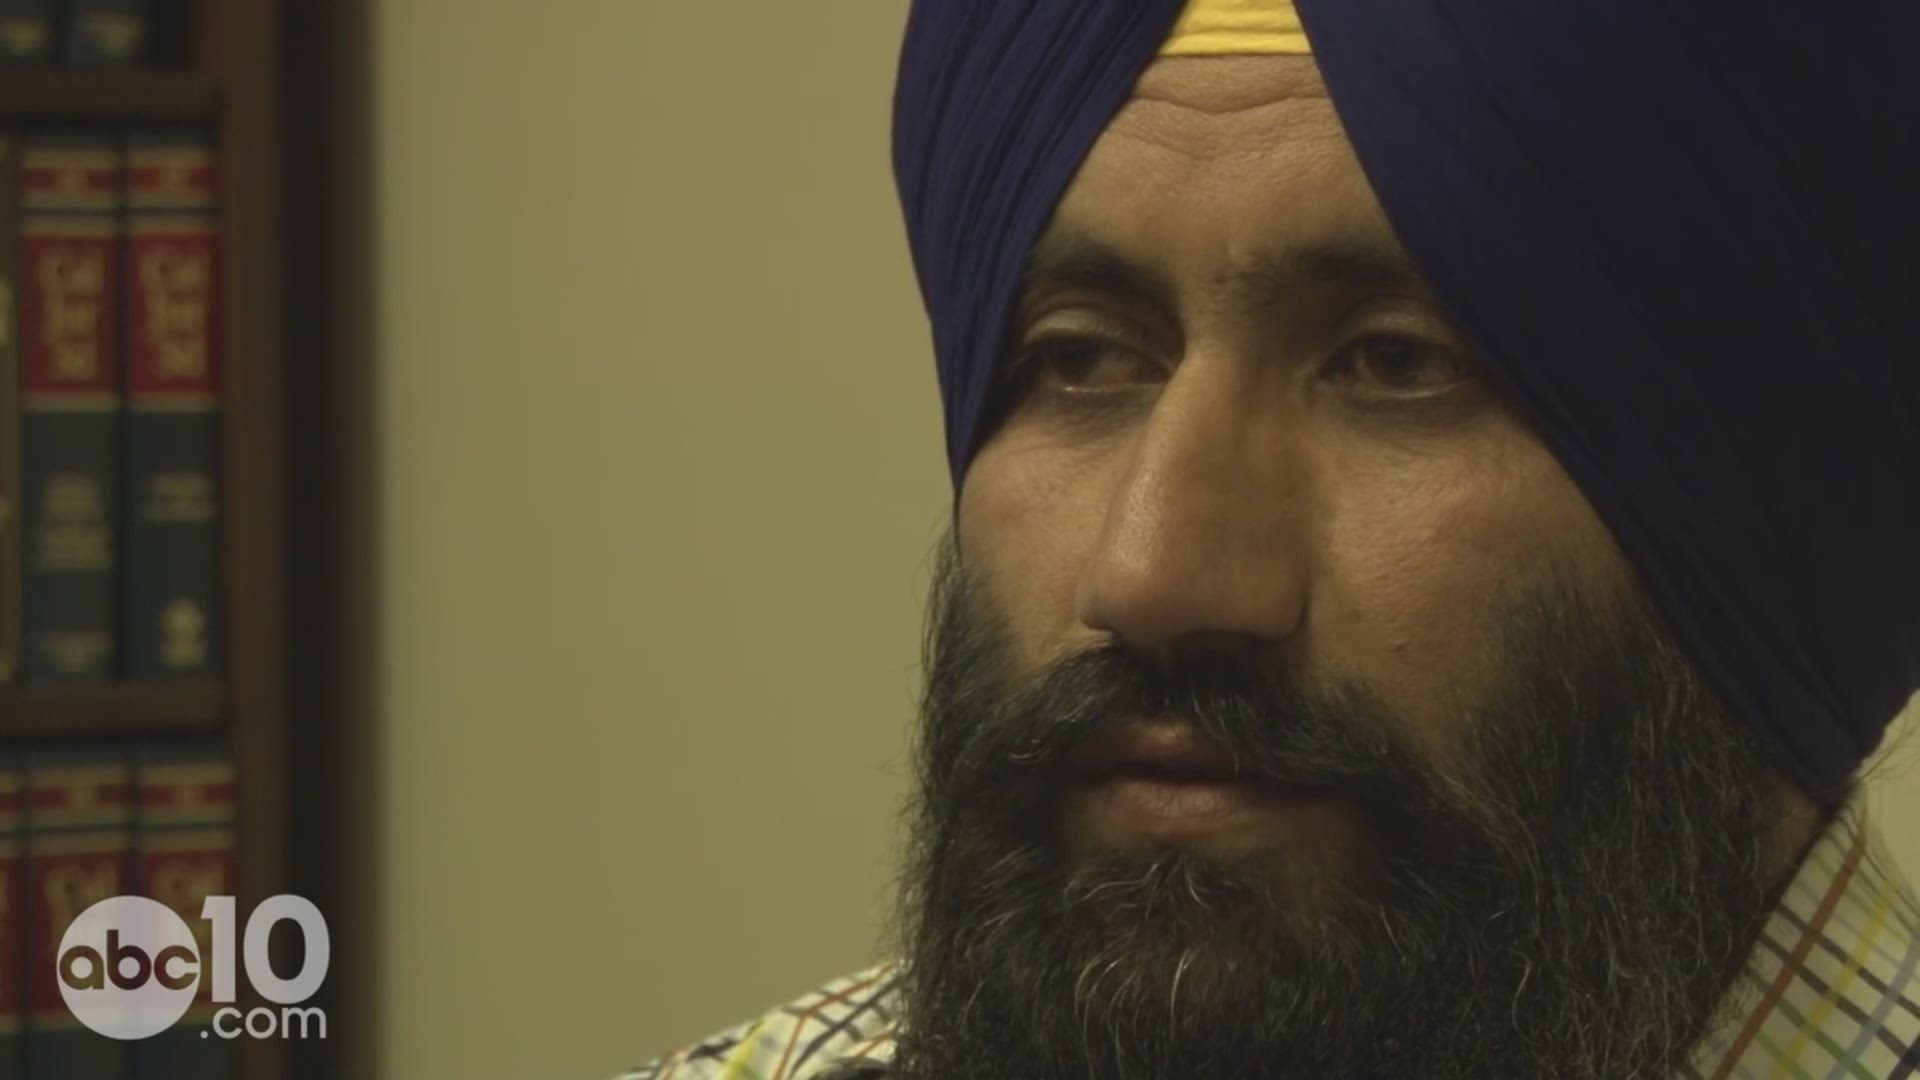 Sandeep Singh, a Sikh man from Ceres, was falsely accused of kidnapping by a 14-year-old girl. He spent seven months fighting the charge before surveillance footage from a nearby church ultimately proved his innocence.